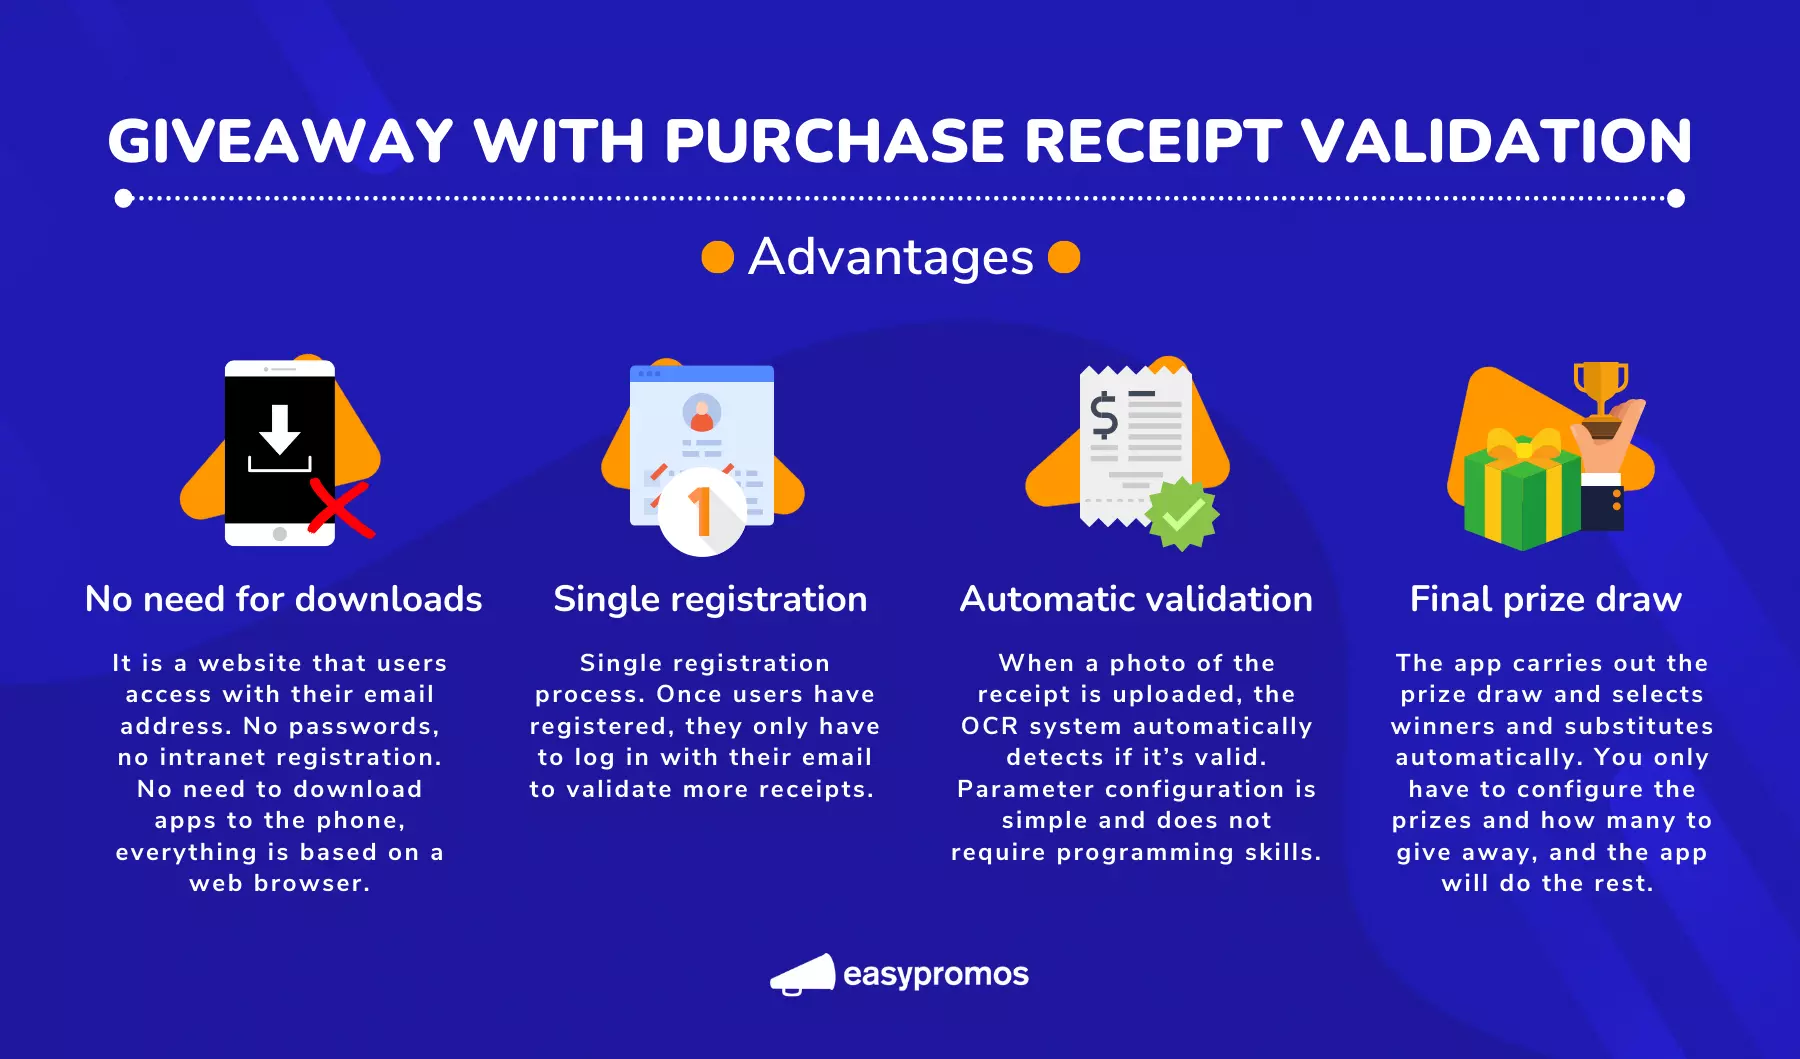 Incentivize purchasing and reward users